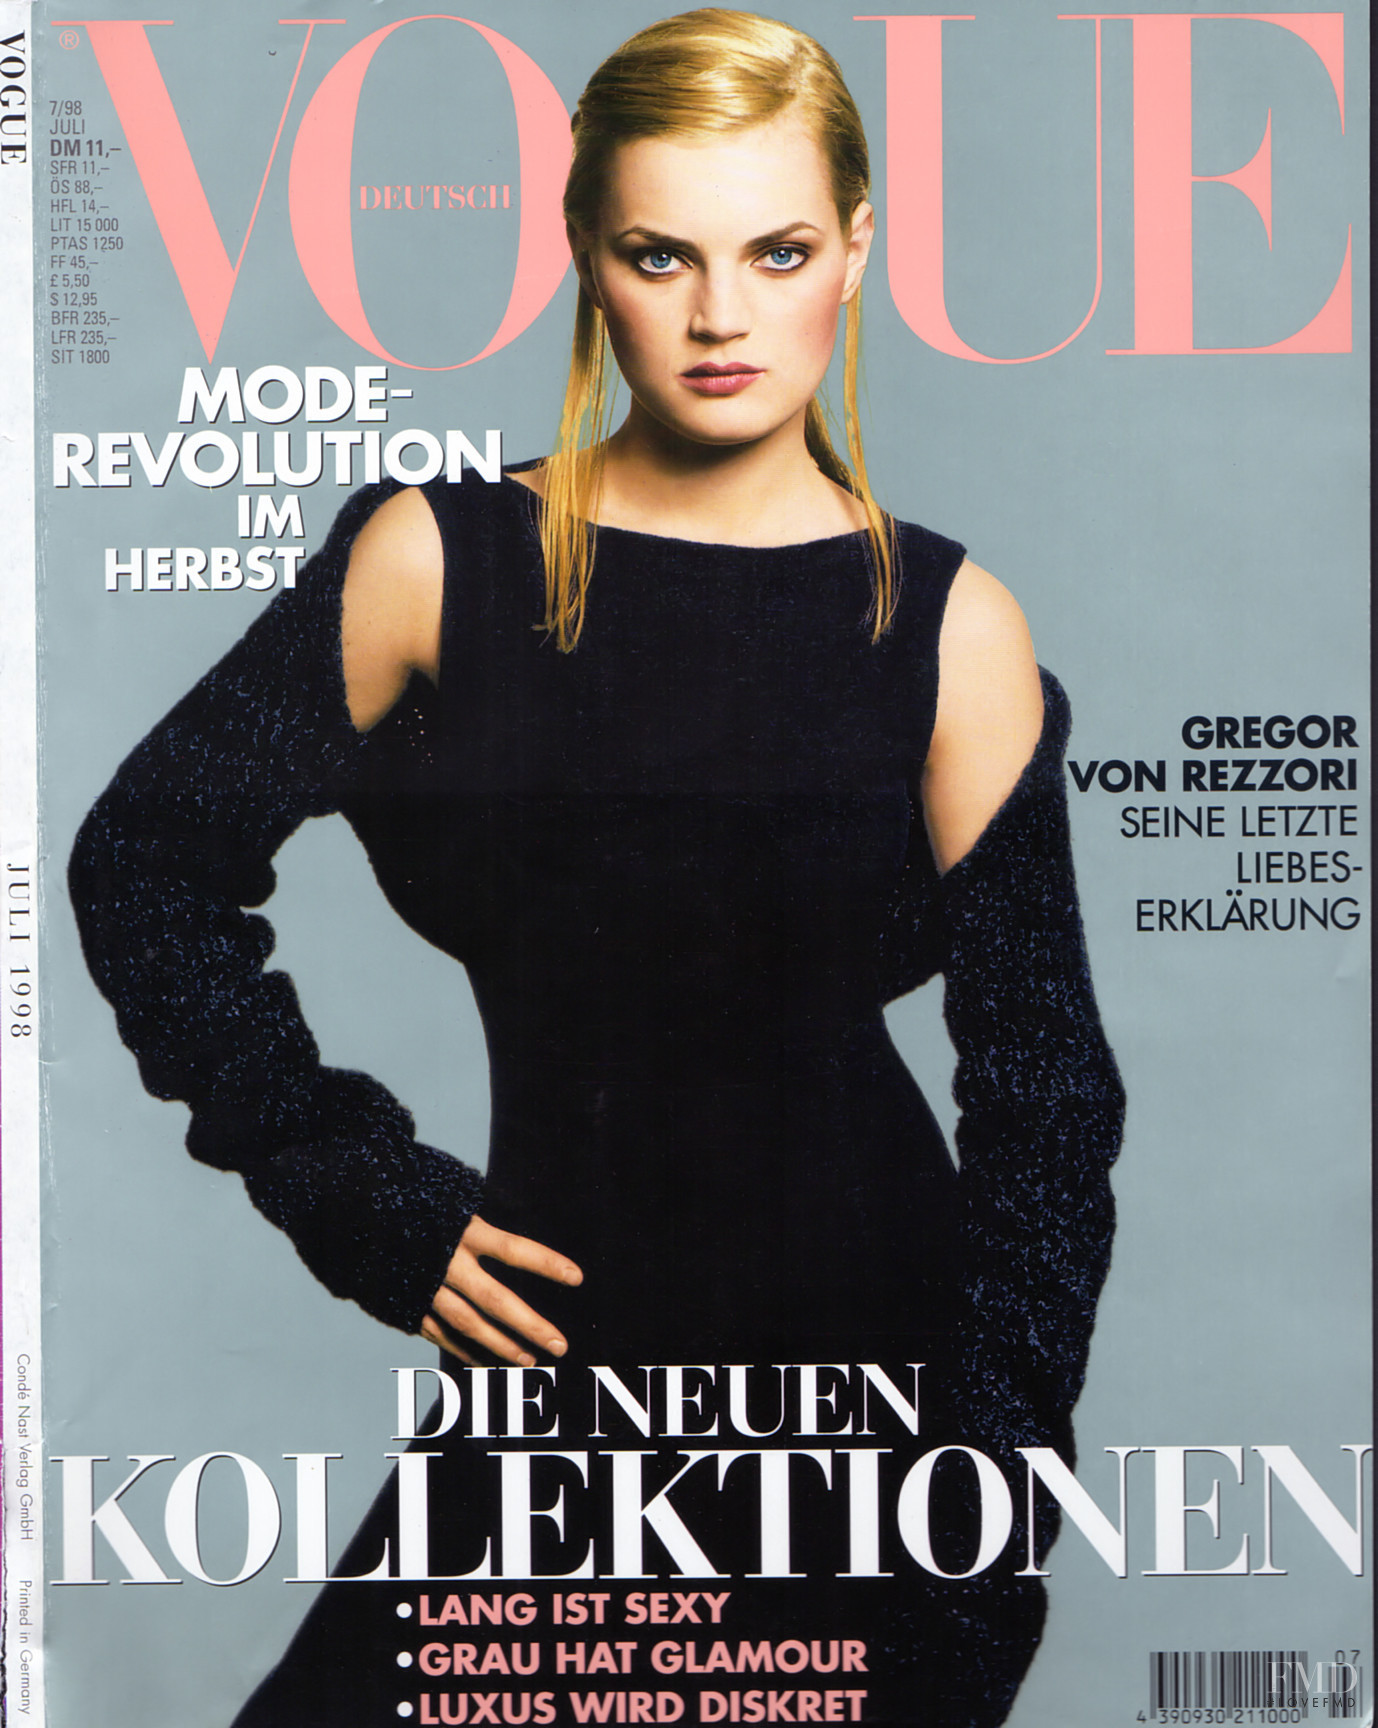 Cover of Vogue Germany with Guinevere van Seenus, July 1998 (ID:57354 ...